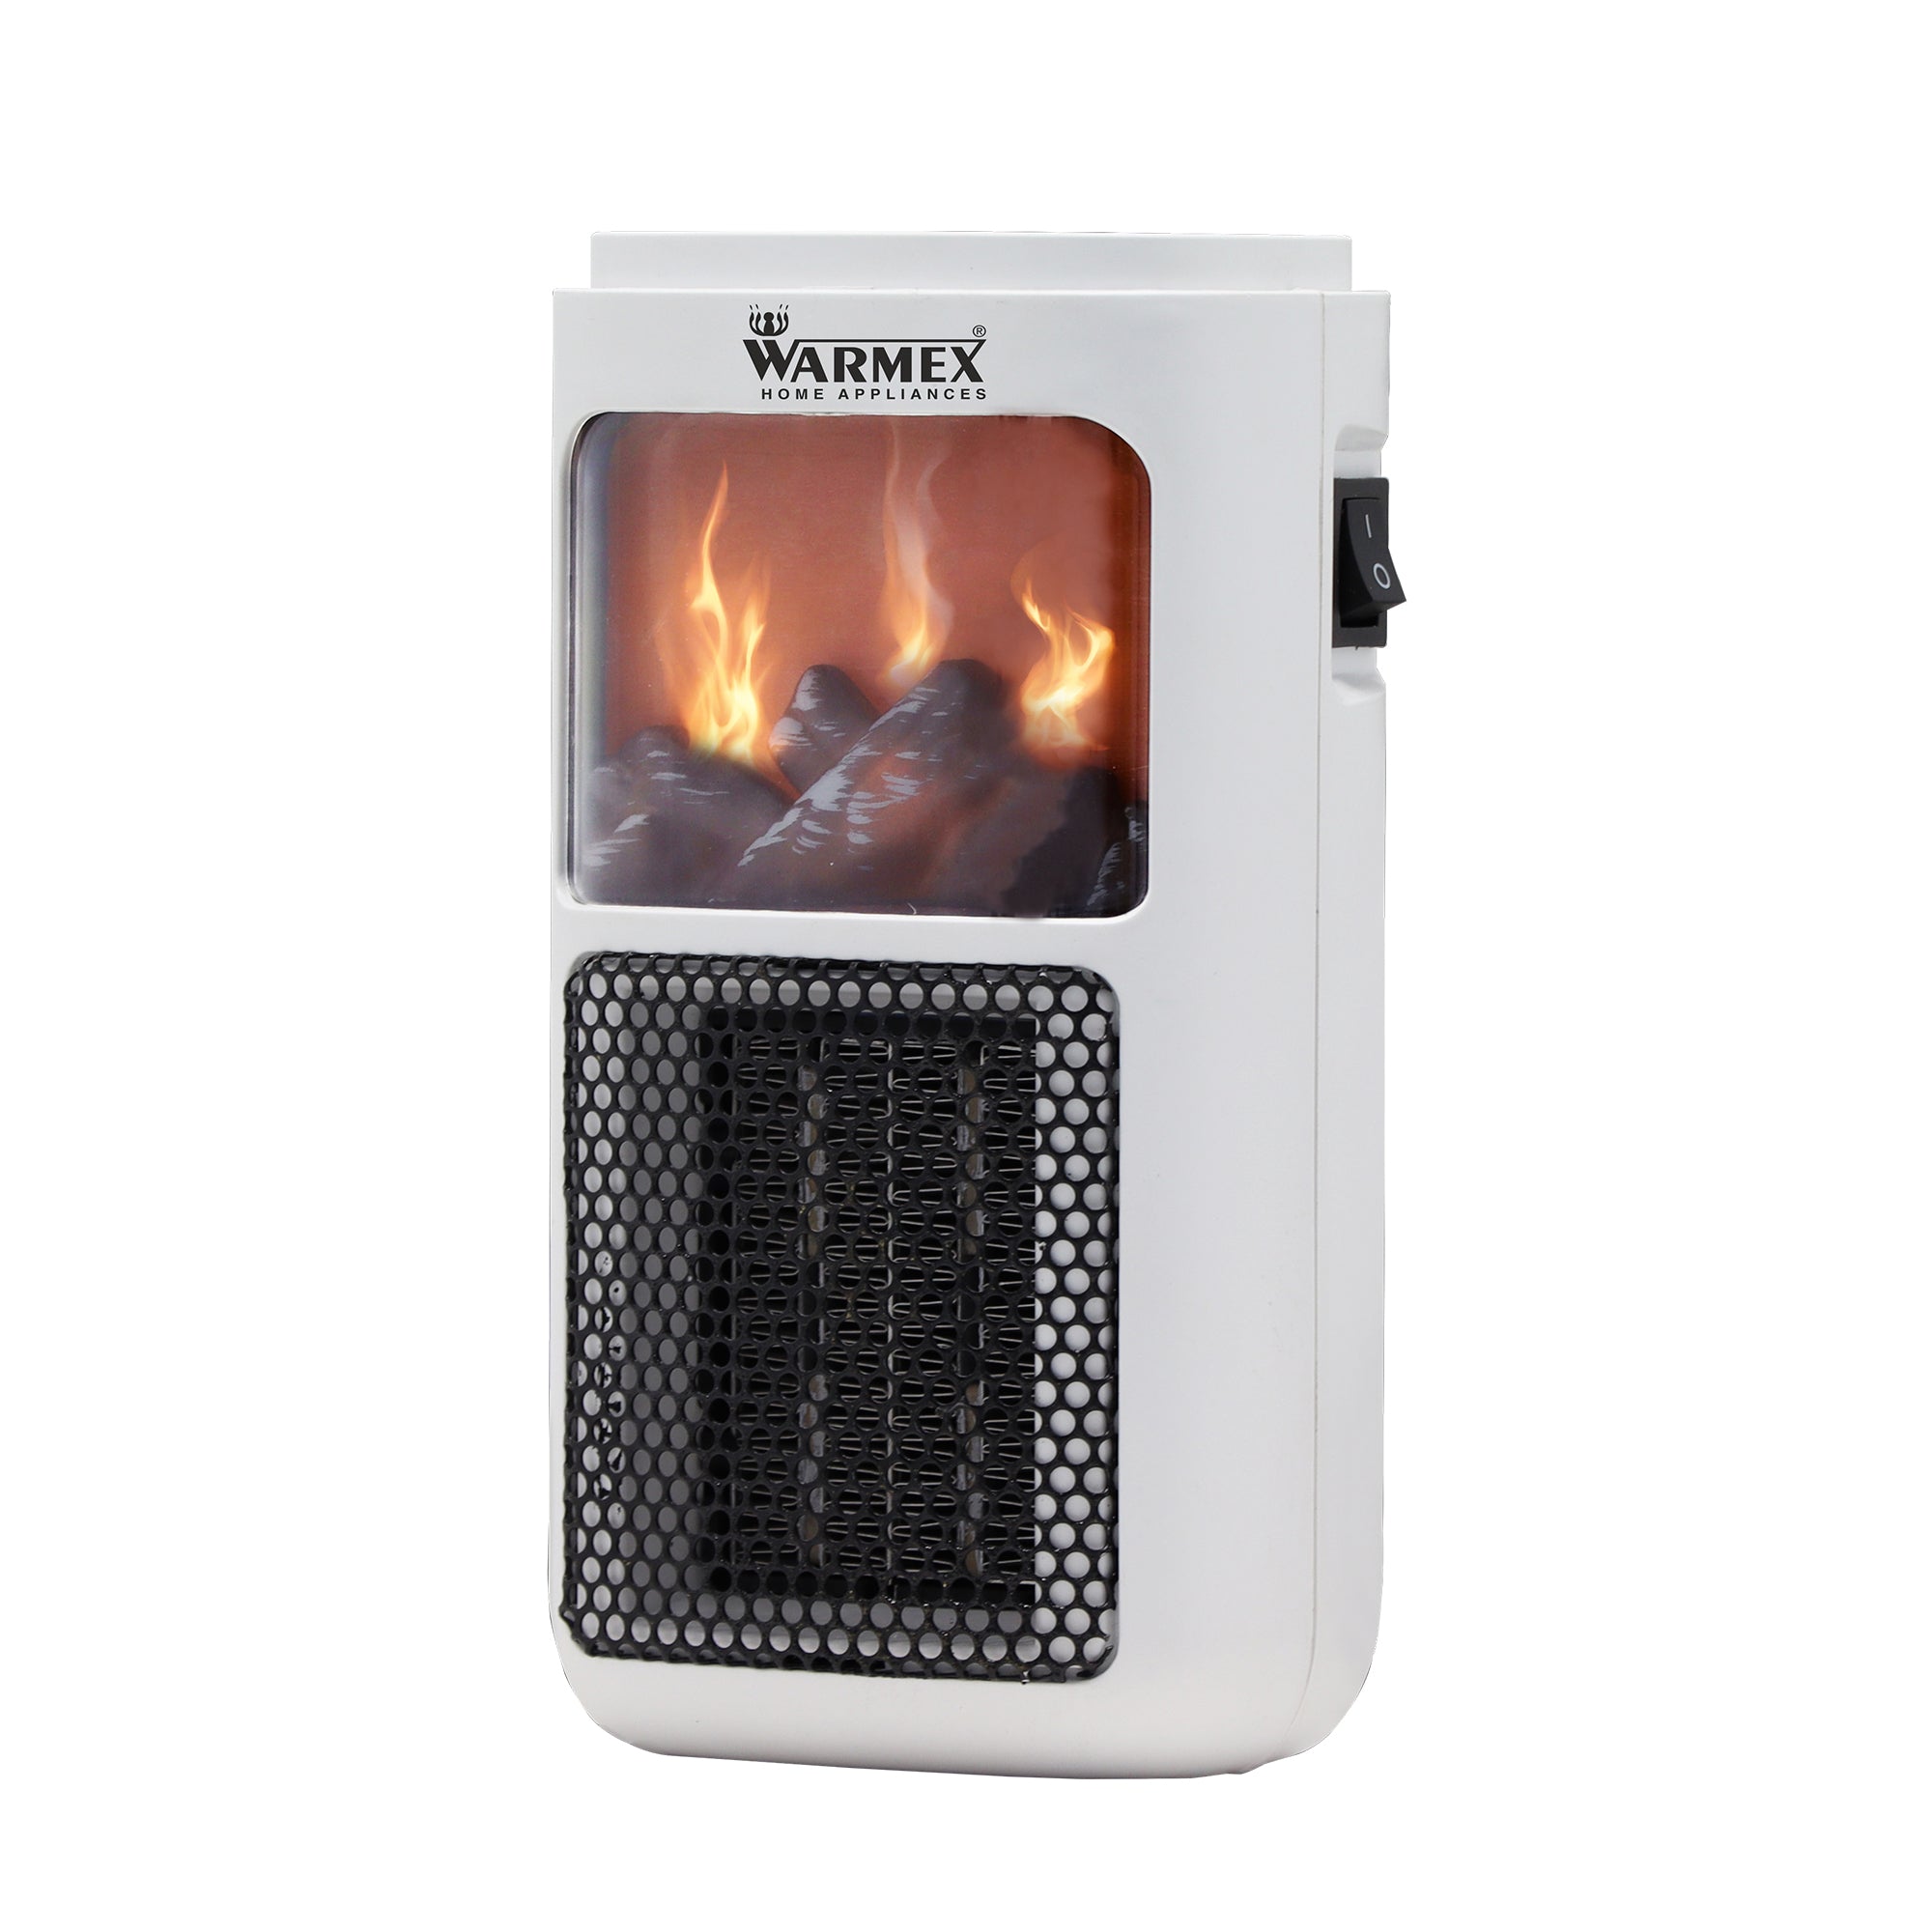 Warmex 400 Watts Electric PTC Heater/Wall Mount Heater/Fan Heater/Room Heater MINI BONFIRE with 15-45°C Variable Temperature Setting & 30 Seconds Time Lapse